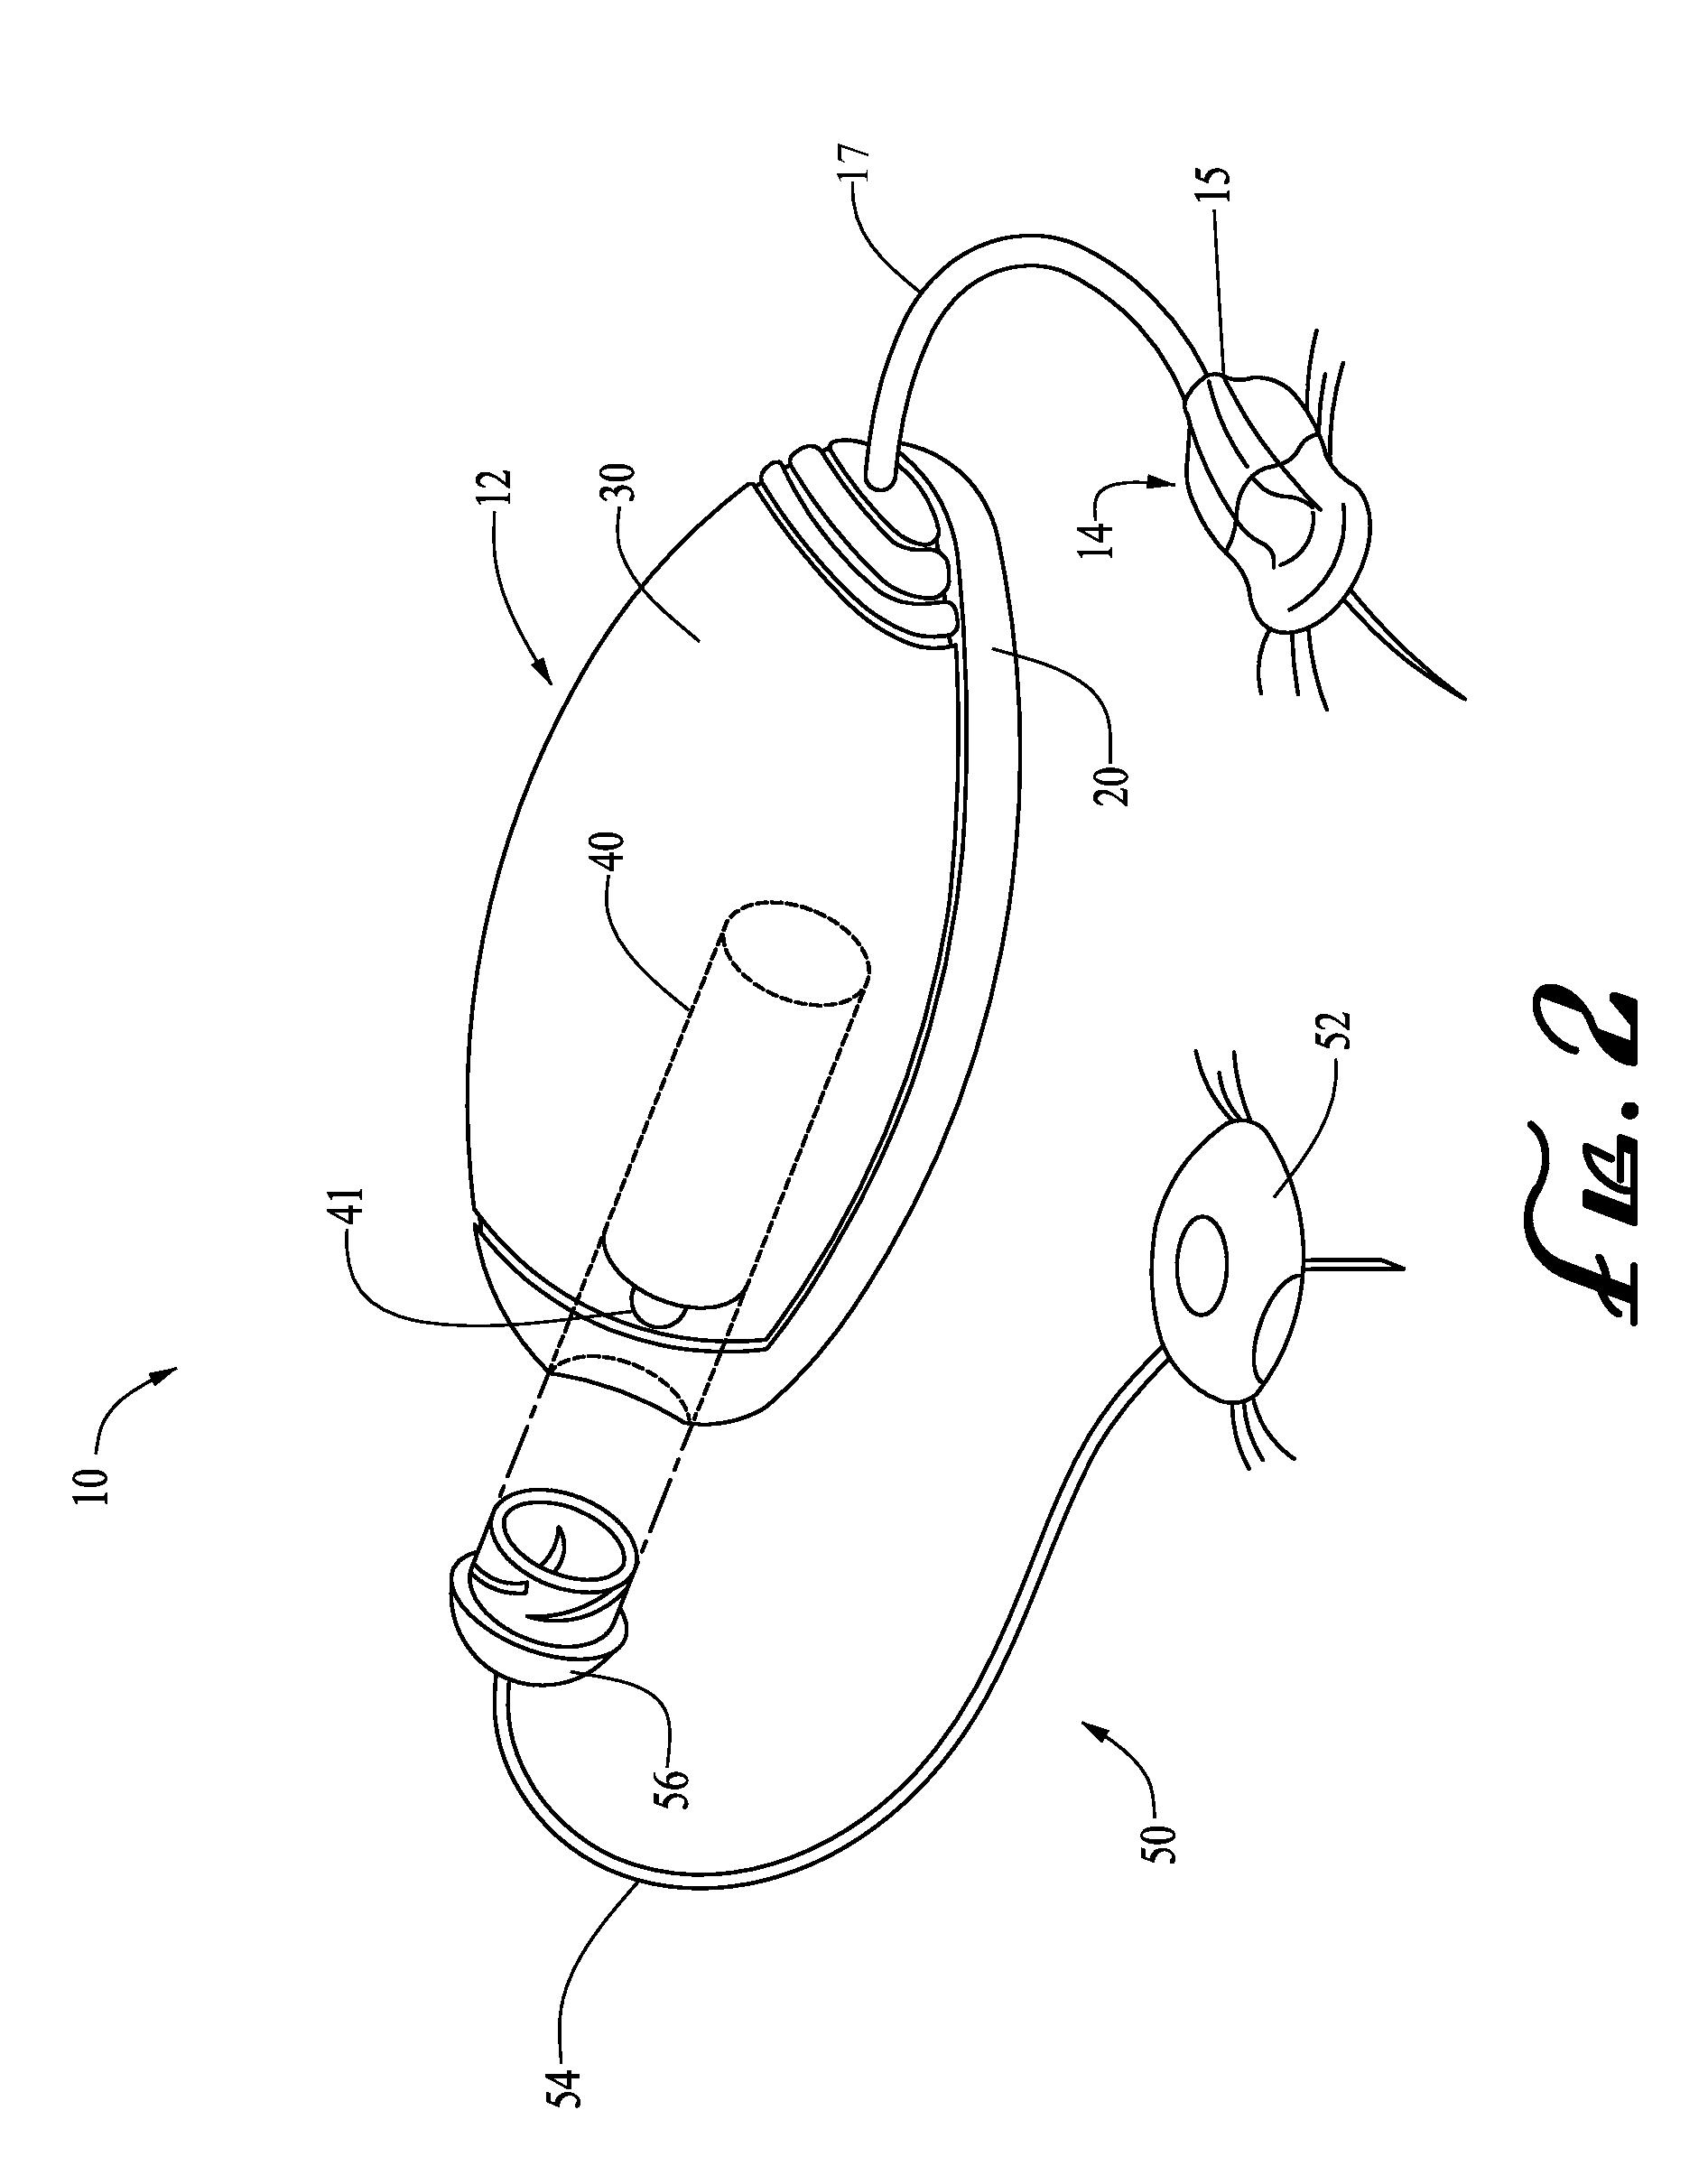 Insertion device systems and methods